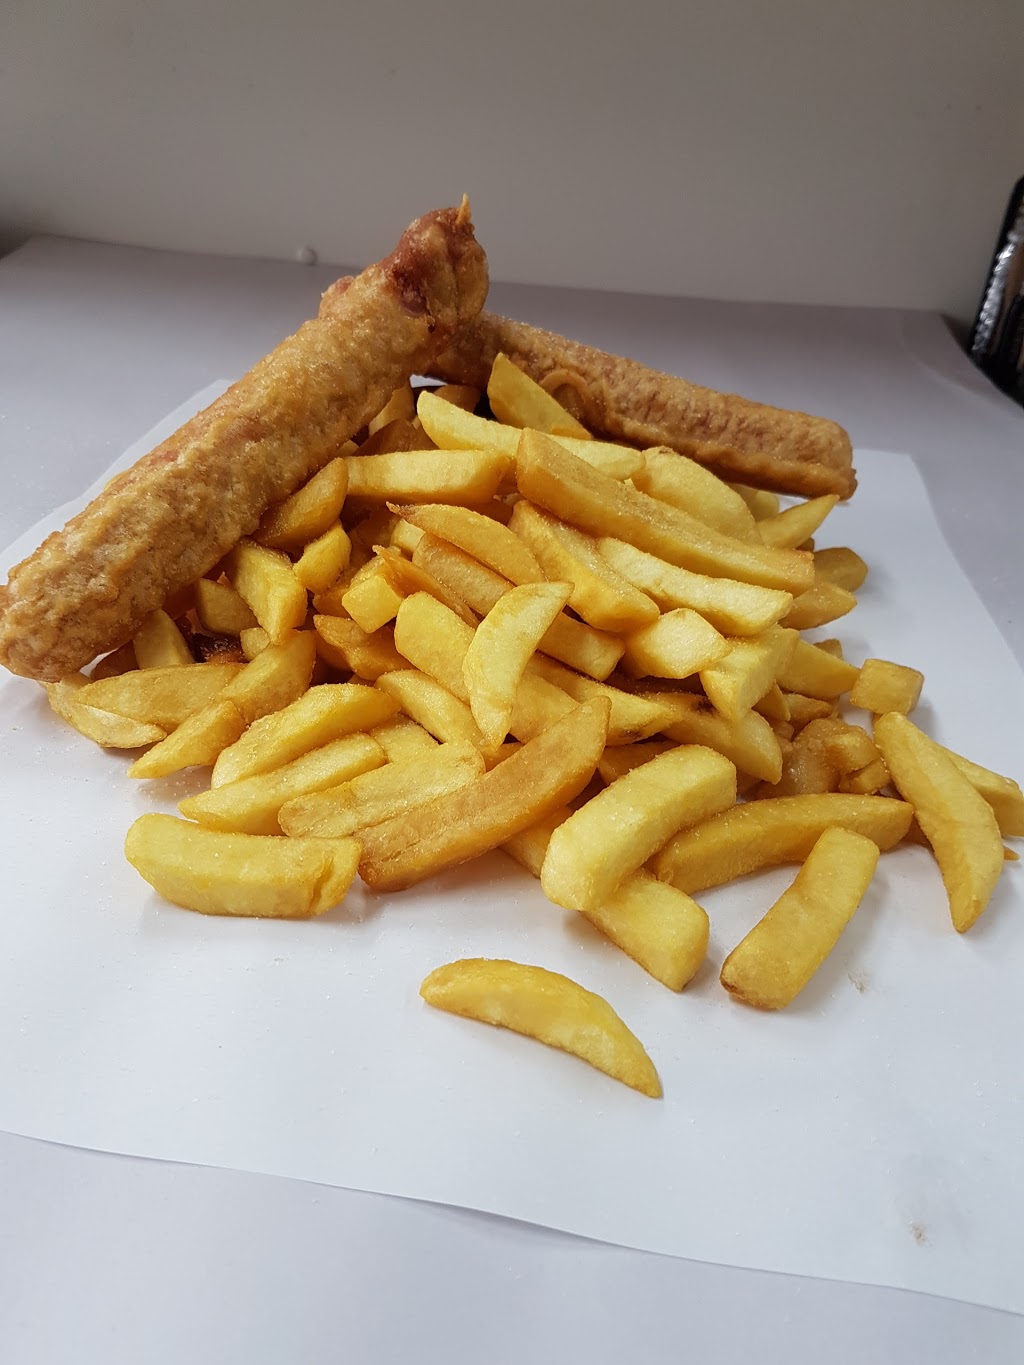 Sharkys Fish Chips | meal delivery | 129B Copernicus Way, Keilor Downs VIC 3038, Australia | 0393621800 OR +61 3 9362 1800